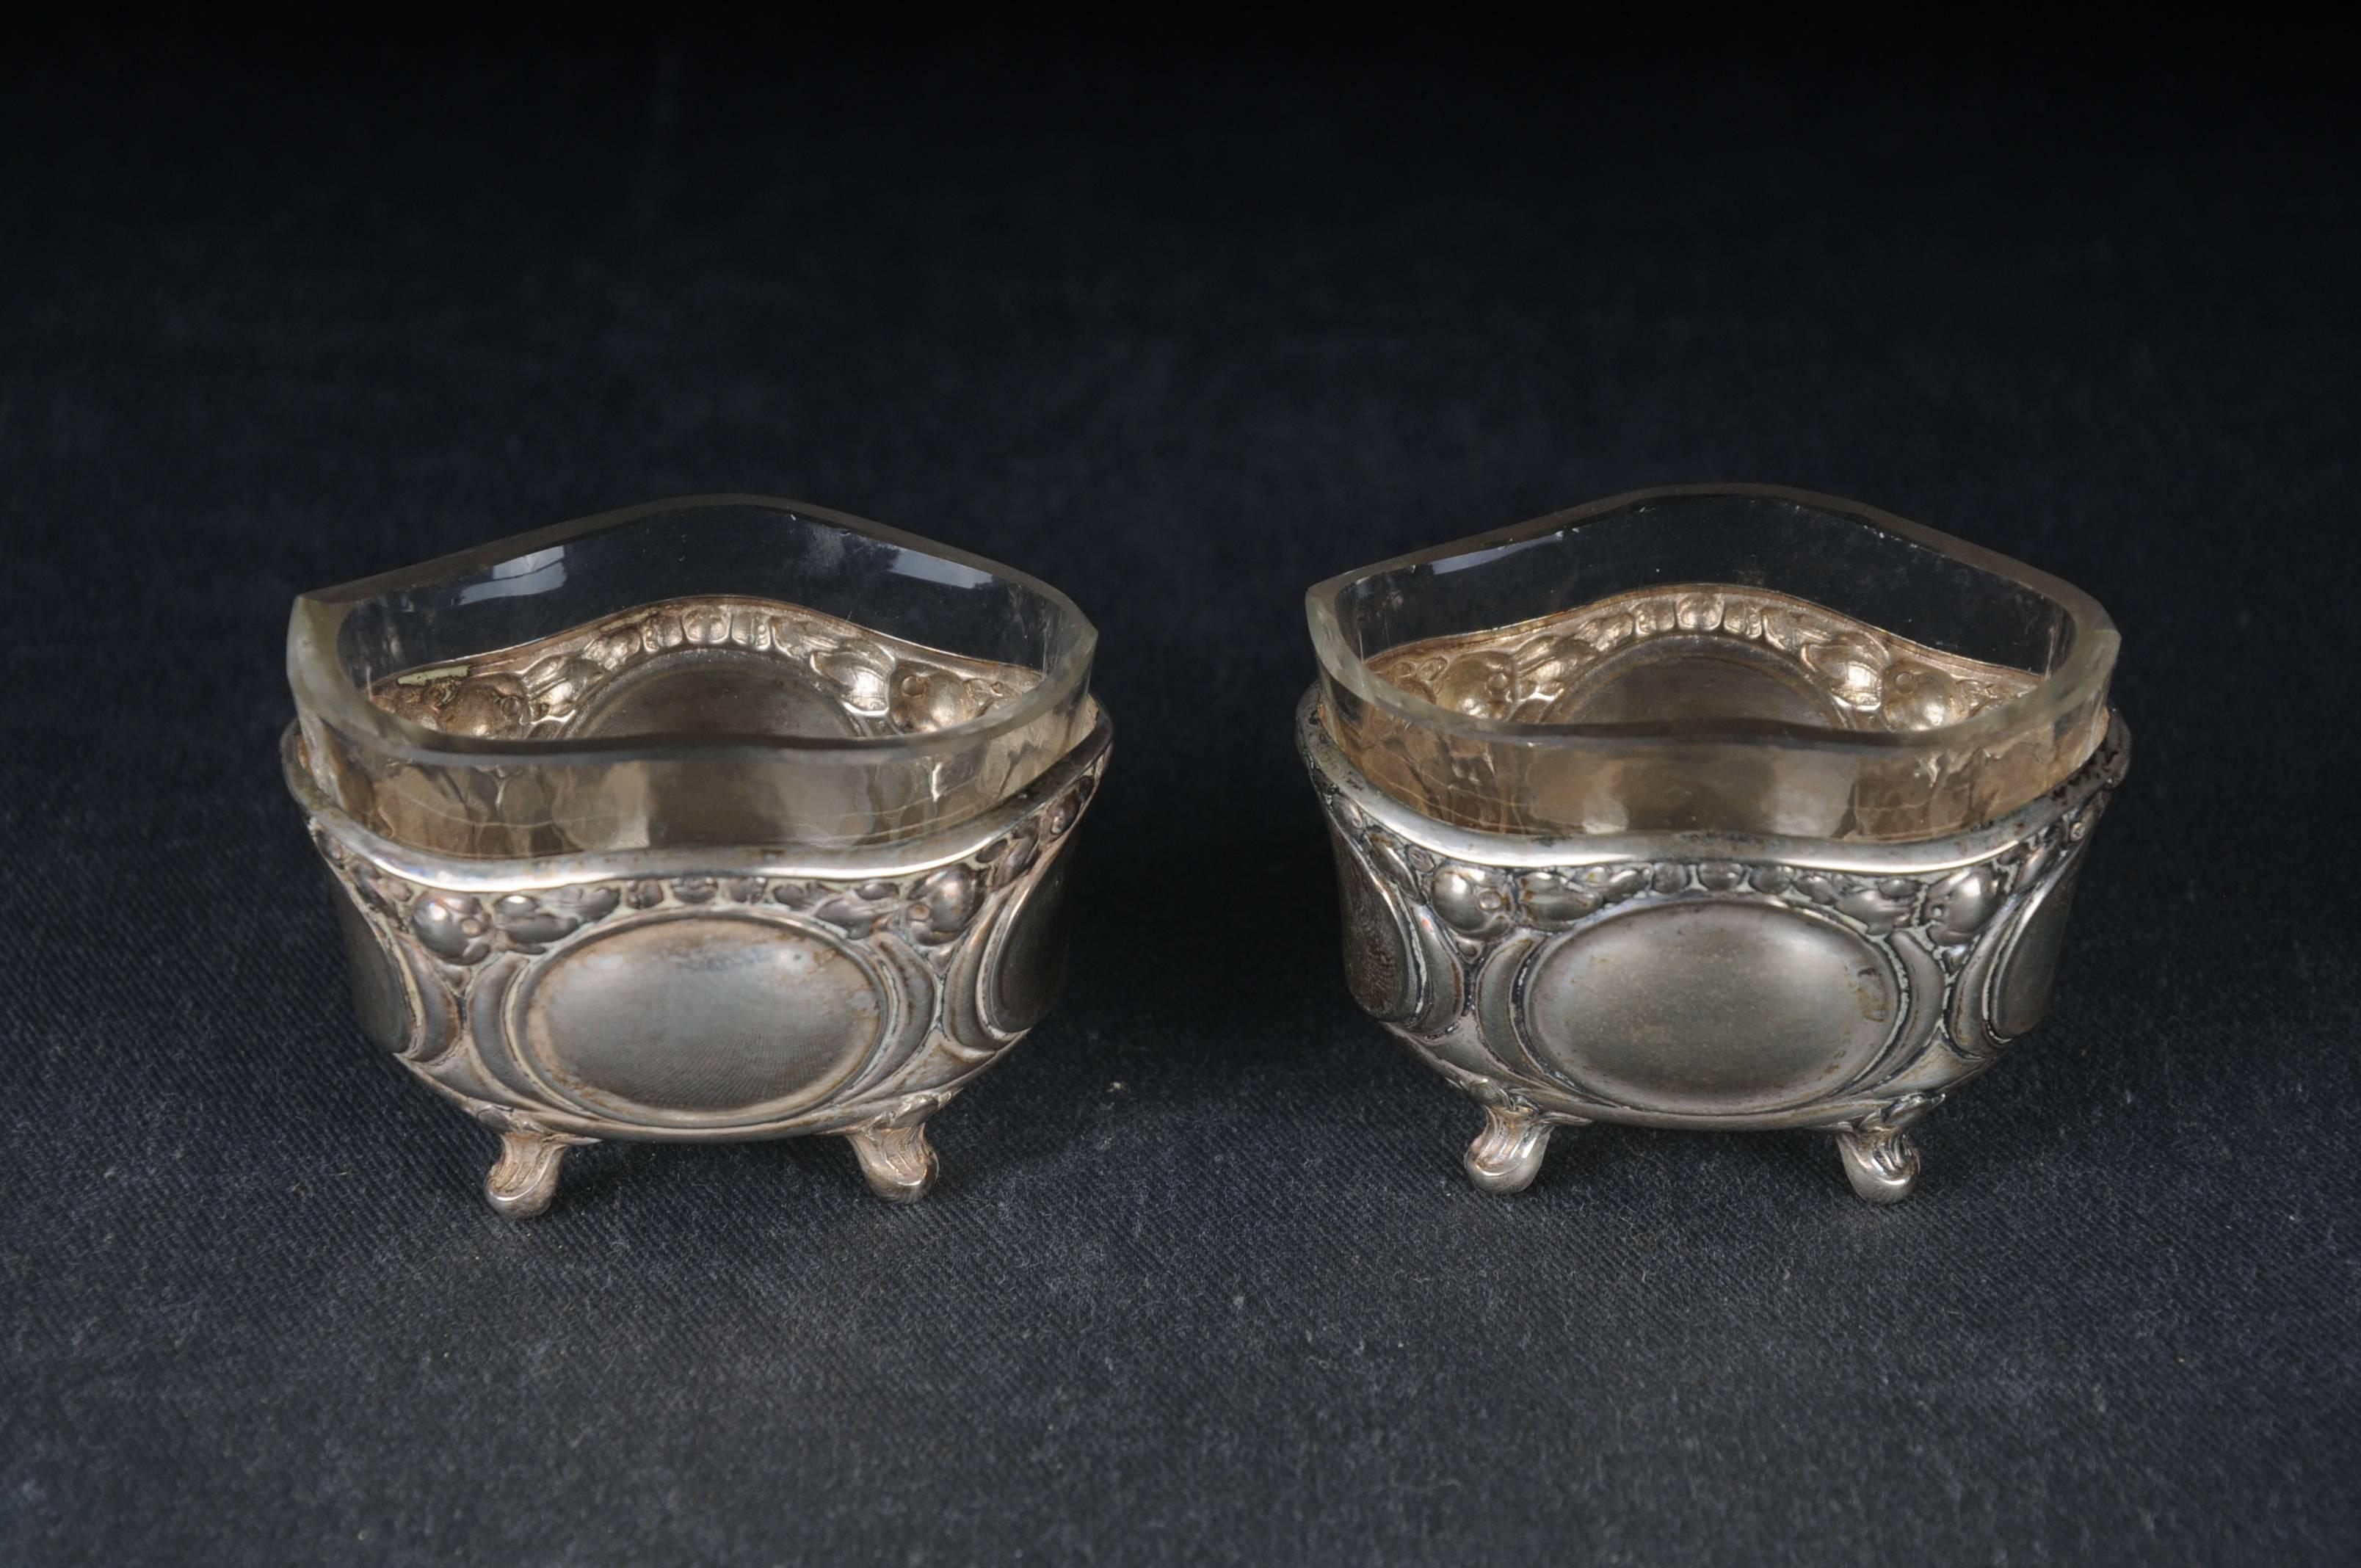 2 Caviar bowls Germany Bowls 
with glass insert 
Silver Plate Kraftalpacca Silver

The condition can be seen in the pictures.